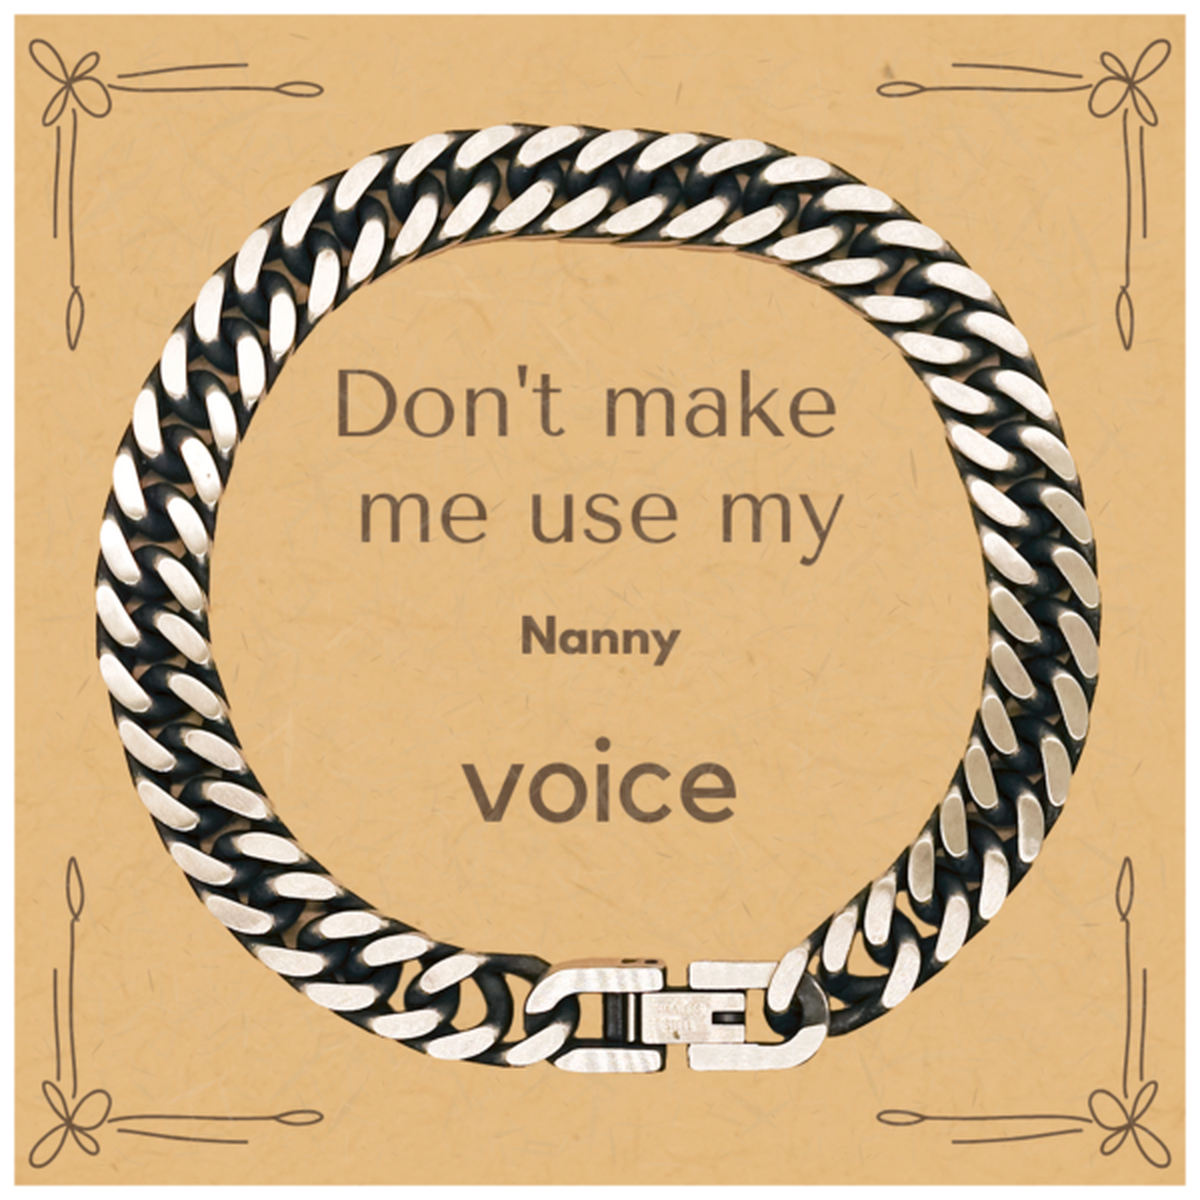 Don't make me use my Nanny voice, Sarcasm Nanny Card Gifts, Christmas Nanny Cuban Link Chain Bracelet Birthday Unique Gifts For Nanny Coworkers, Men, Women, Colleague, Friends